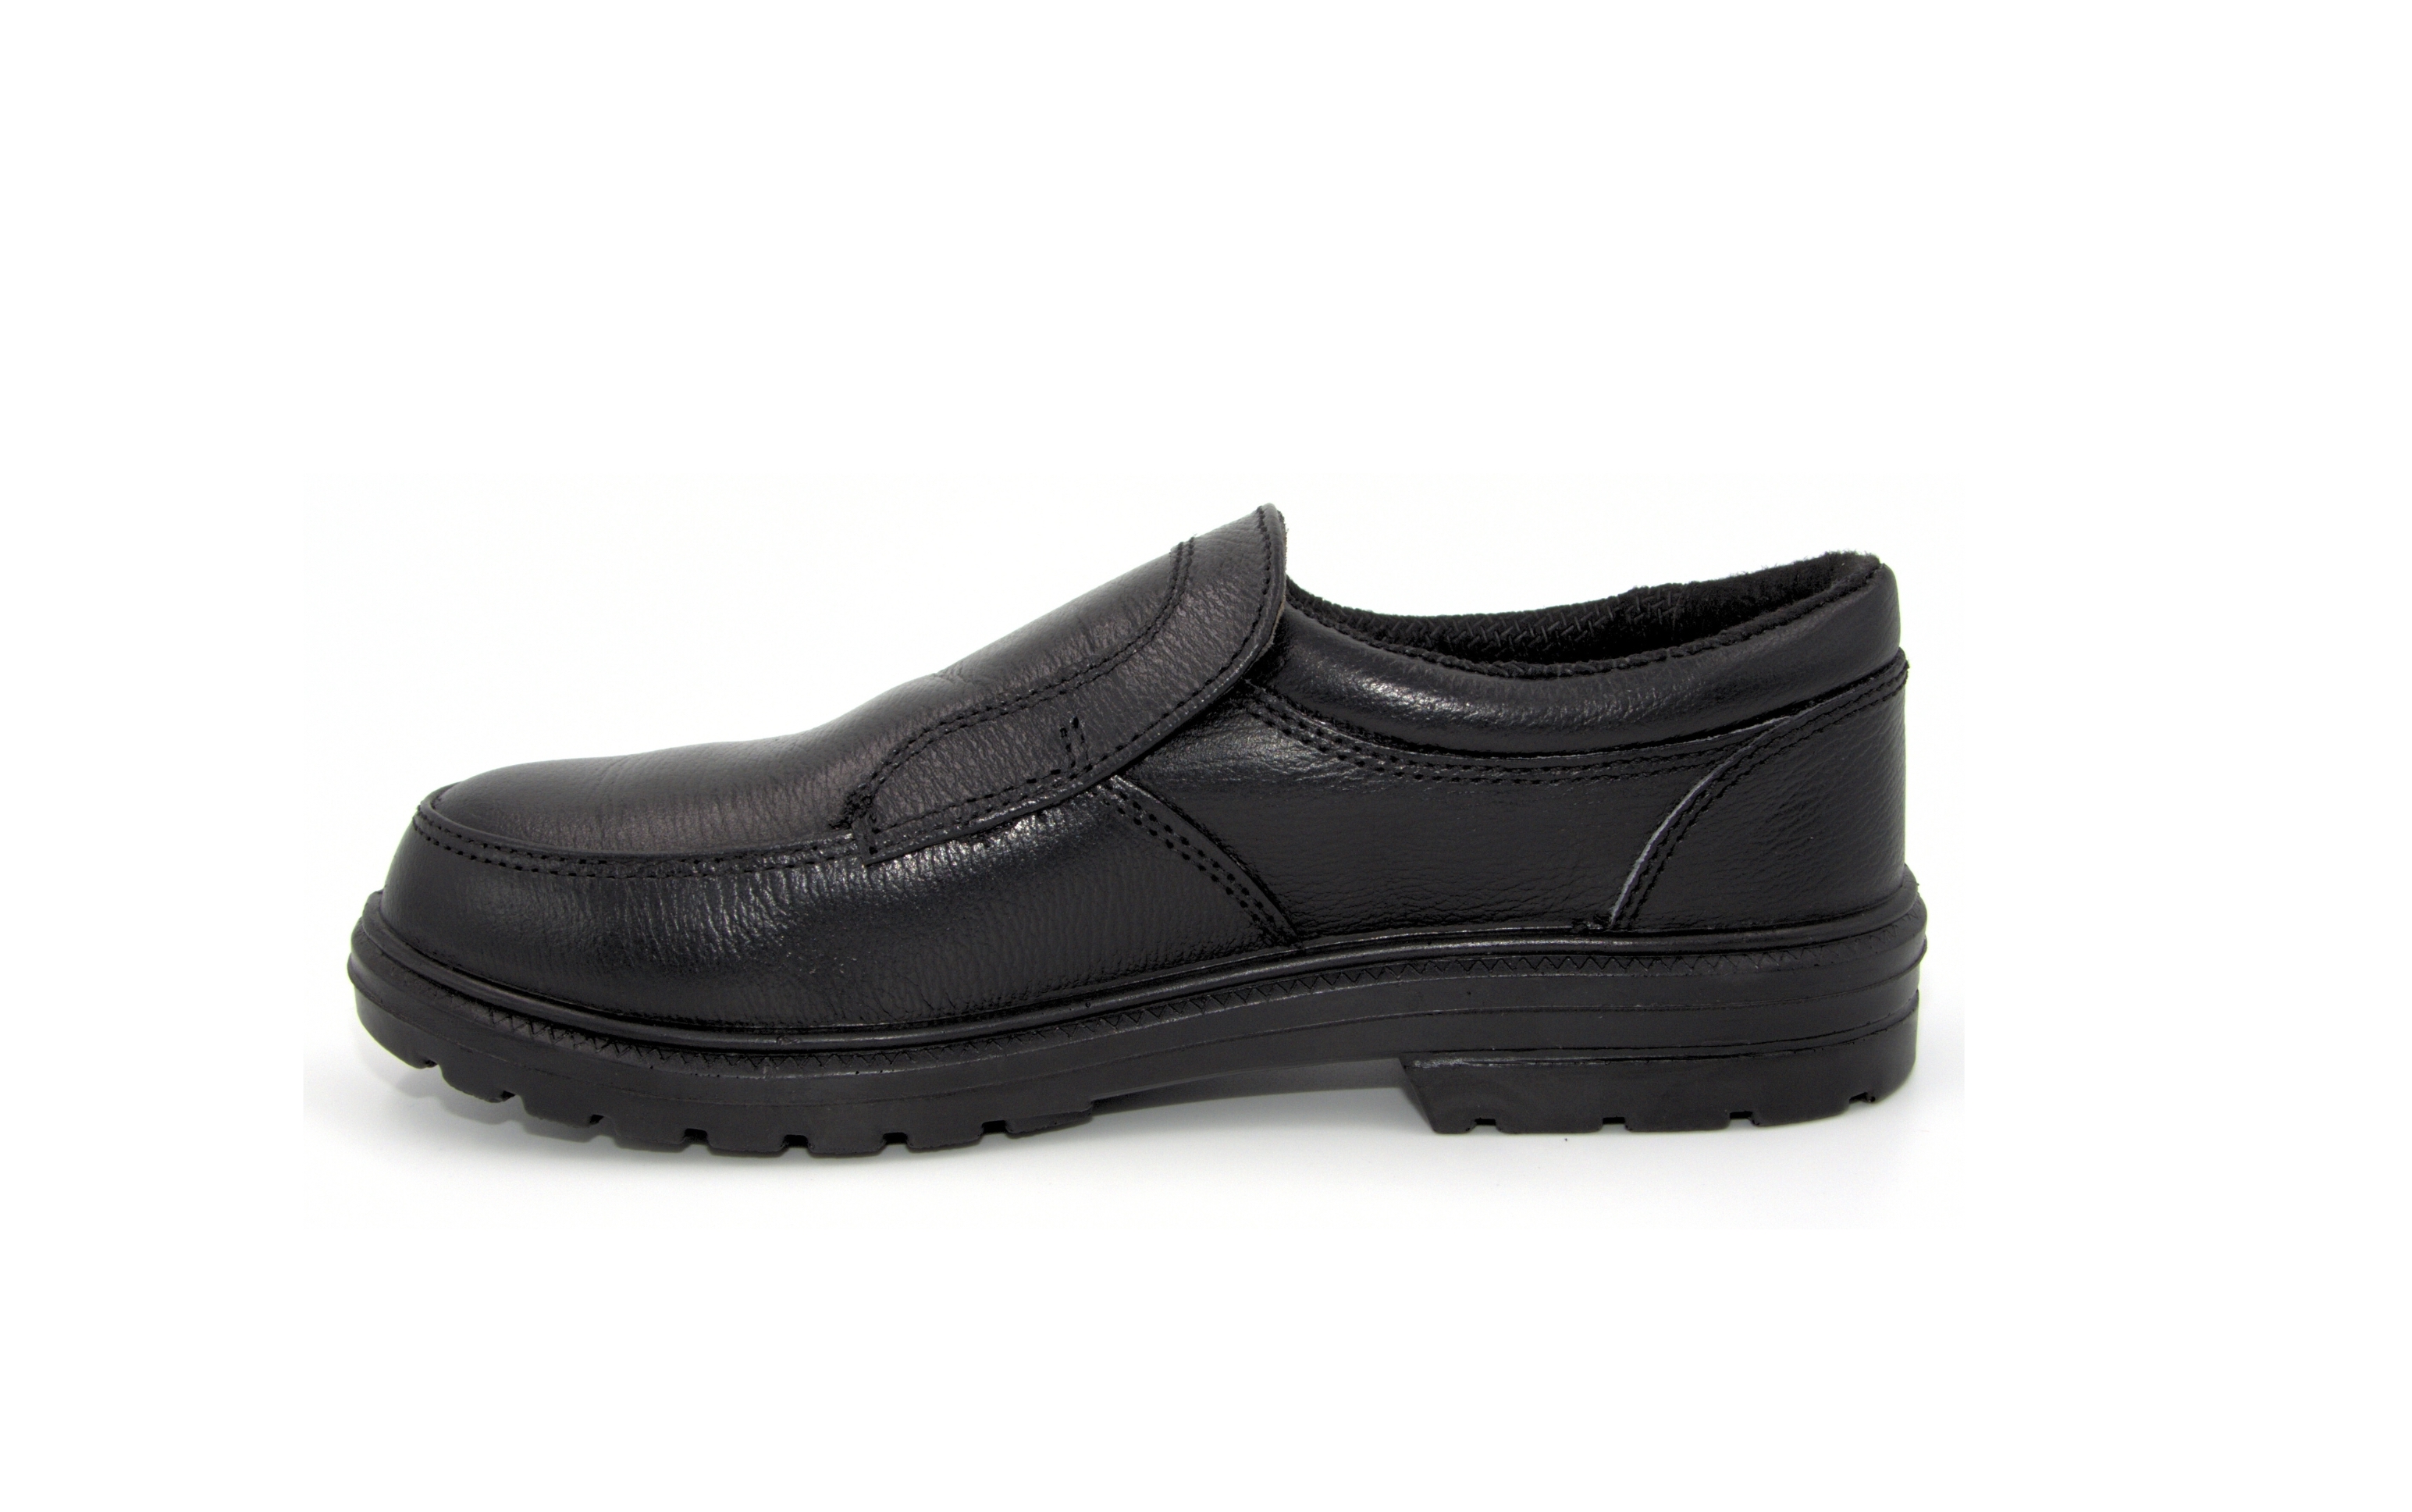 RNS Safety Shoes Manufacturing Company